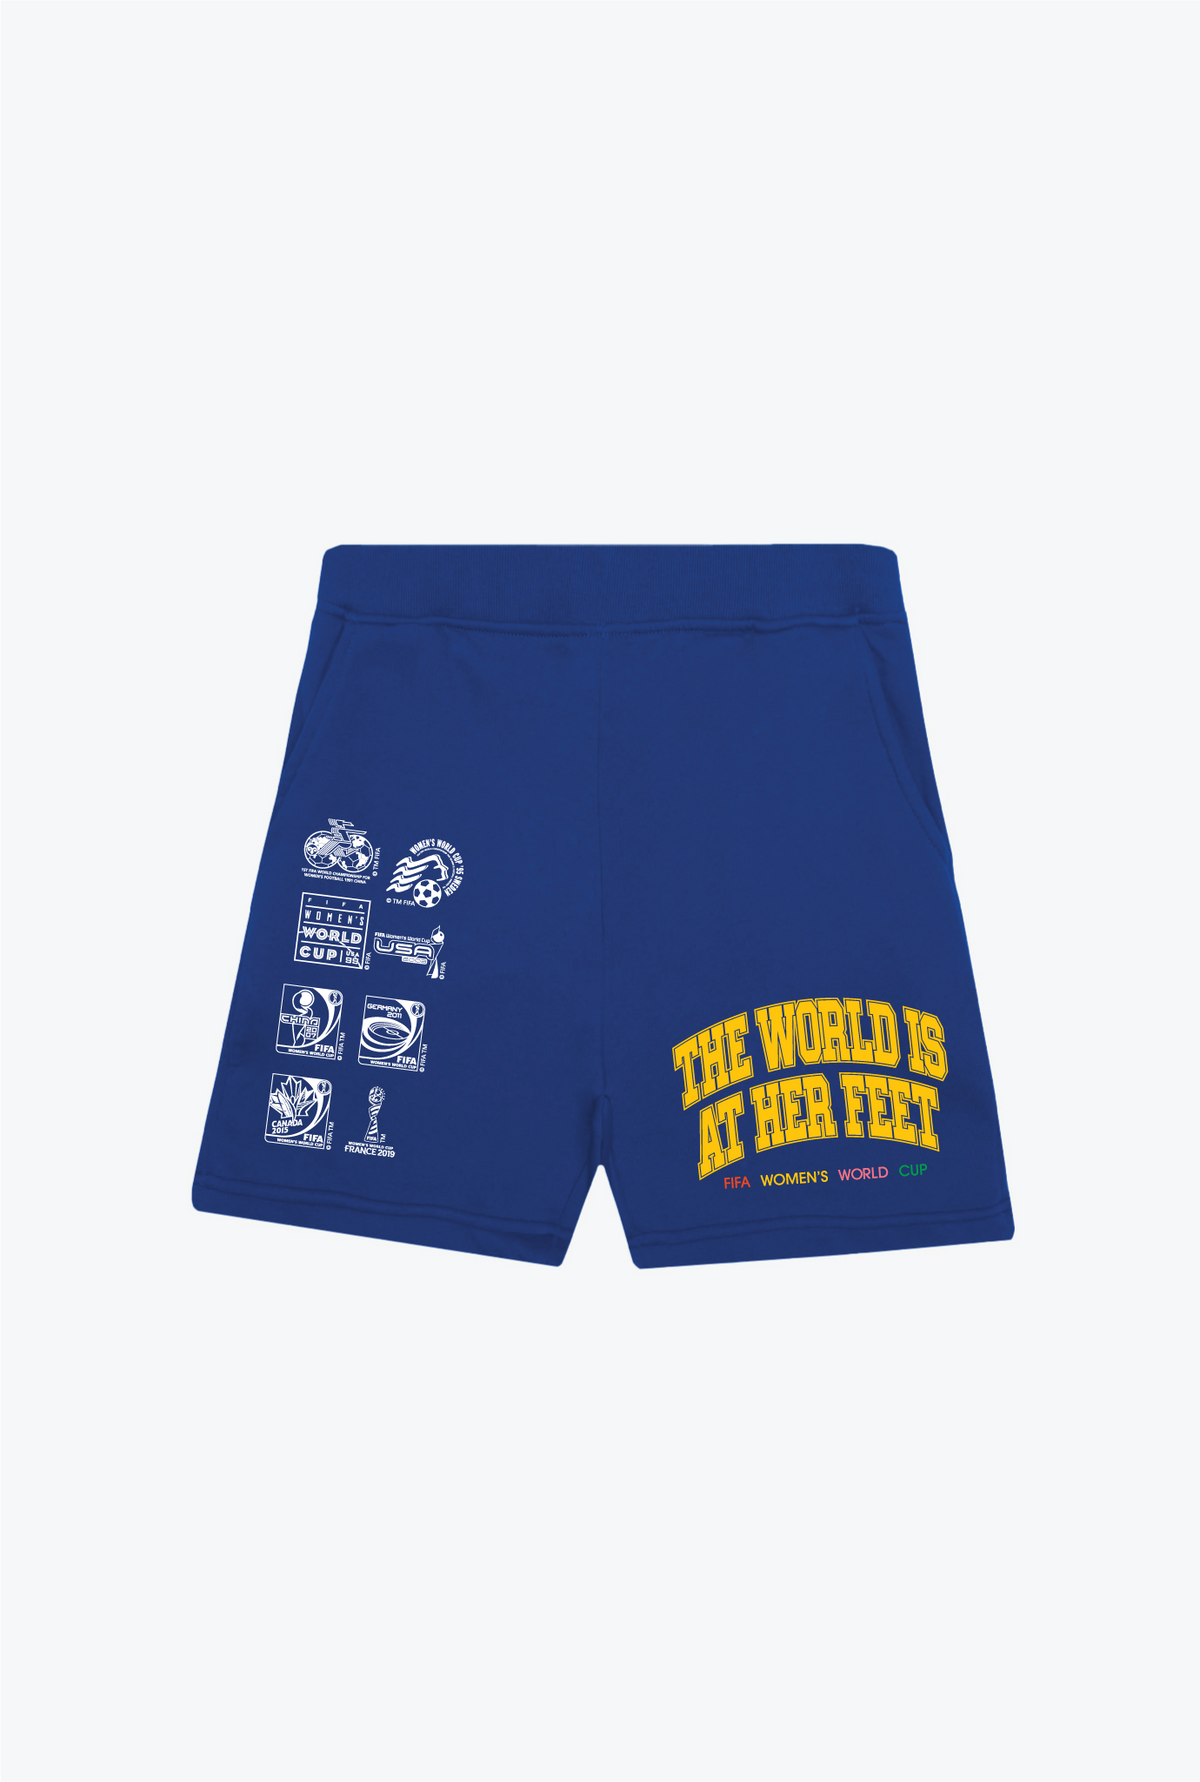 The World is at Her Feet Fleece Shorts - Royal